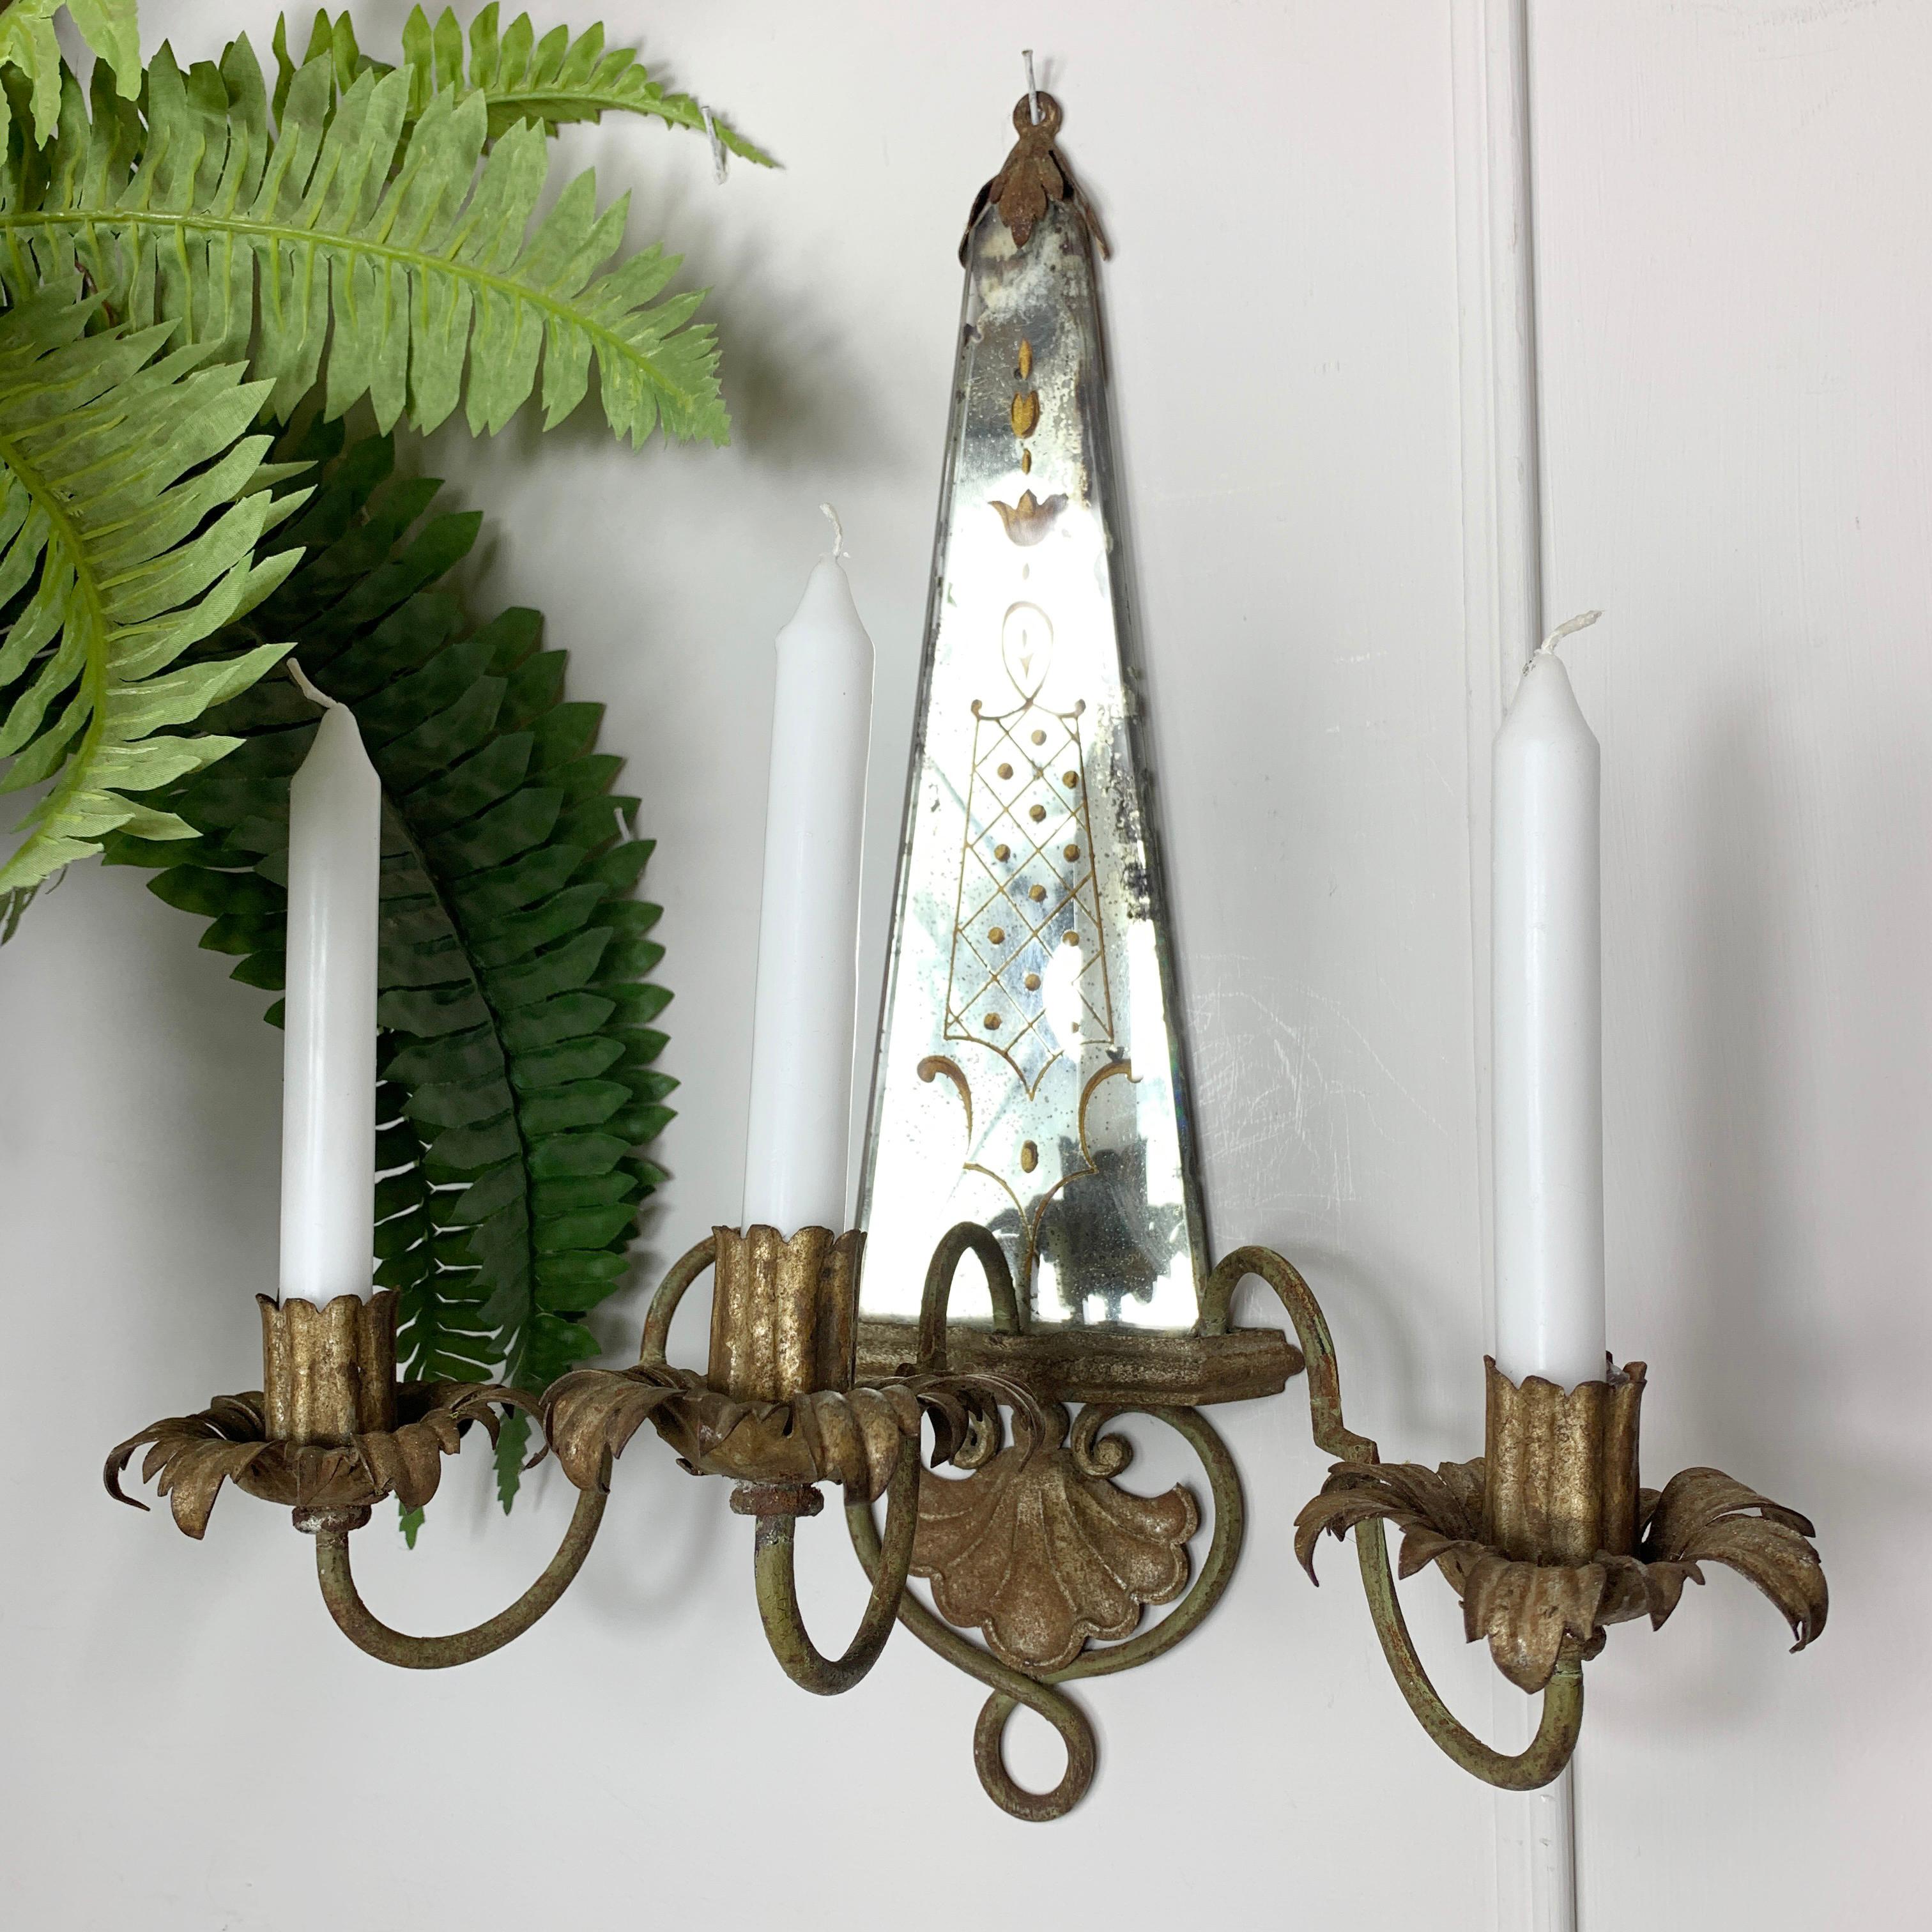 Beautiful back painted mirrored candle wall sconce, dating to the late 19th / early 20th century. French, of very good proportions, the three candle holders in wrought iron, the decorated mirror creates a wonderful effect when the flames reflect